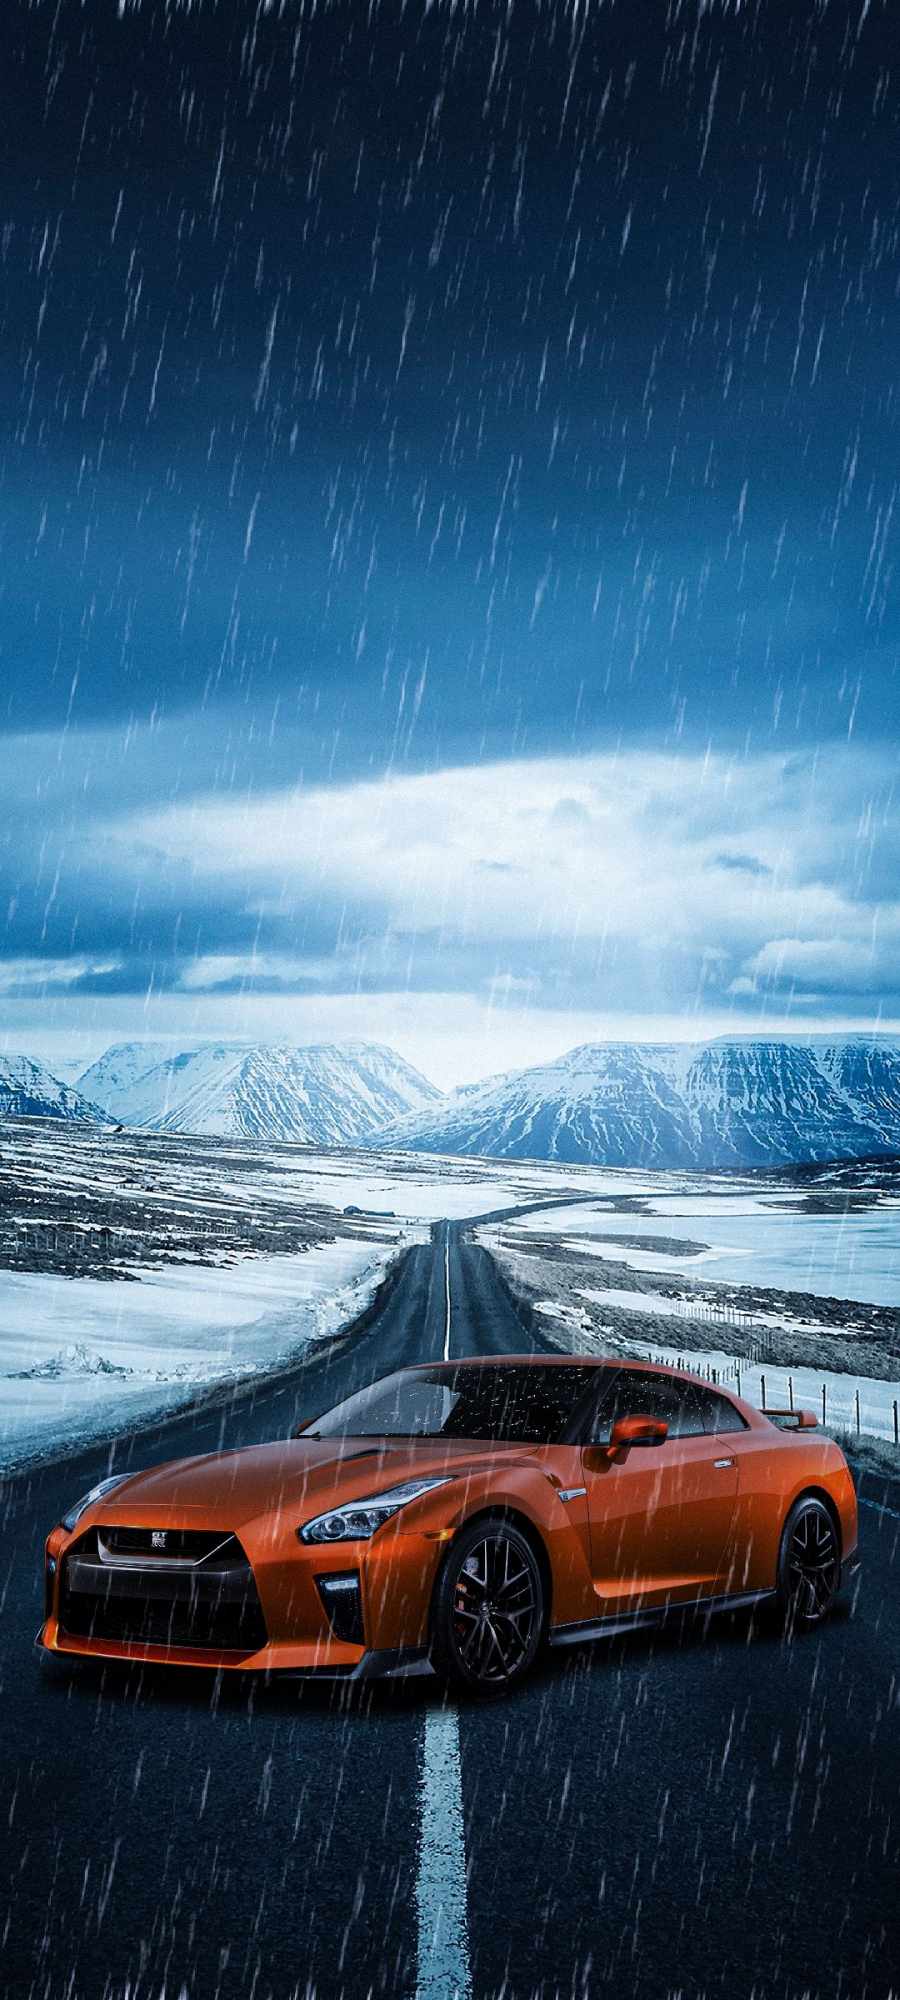 Nissan GTR On Ice Road IPhone Wallpaper - IPhone Wallpapers : iPhone  Wallpapers